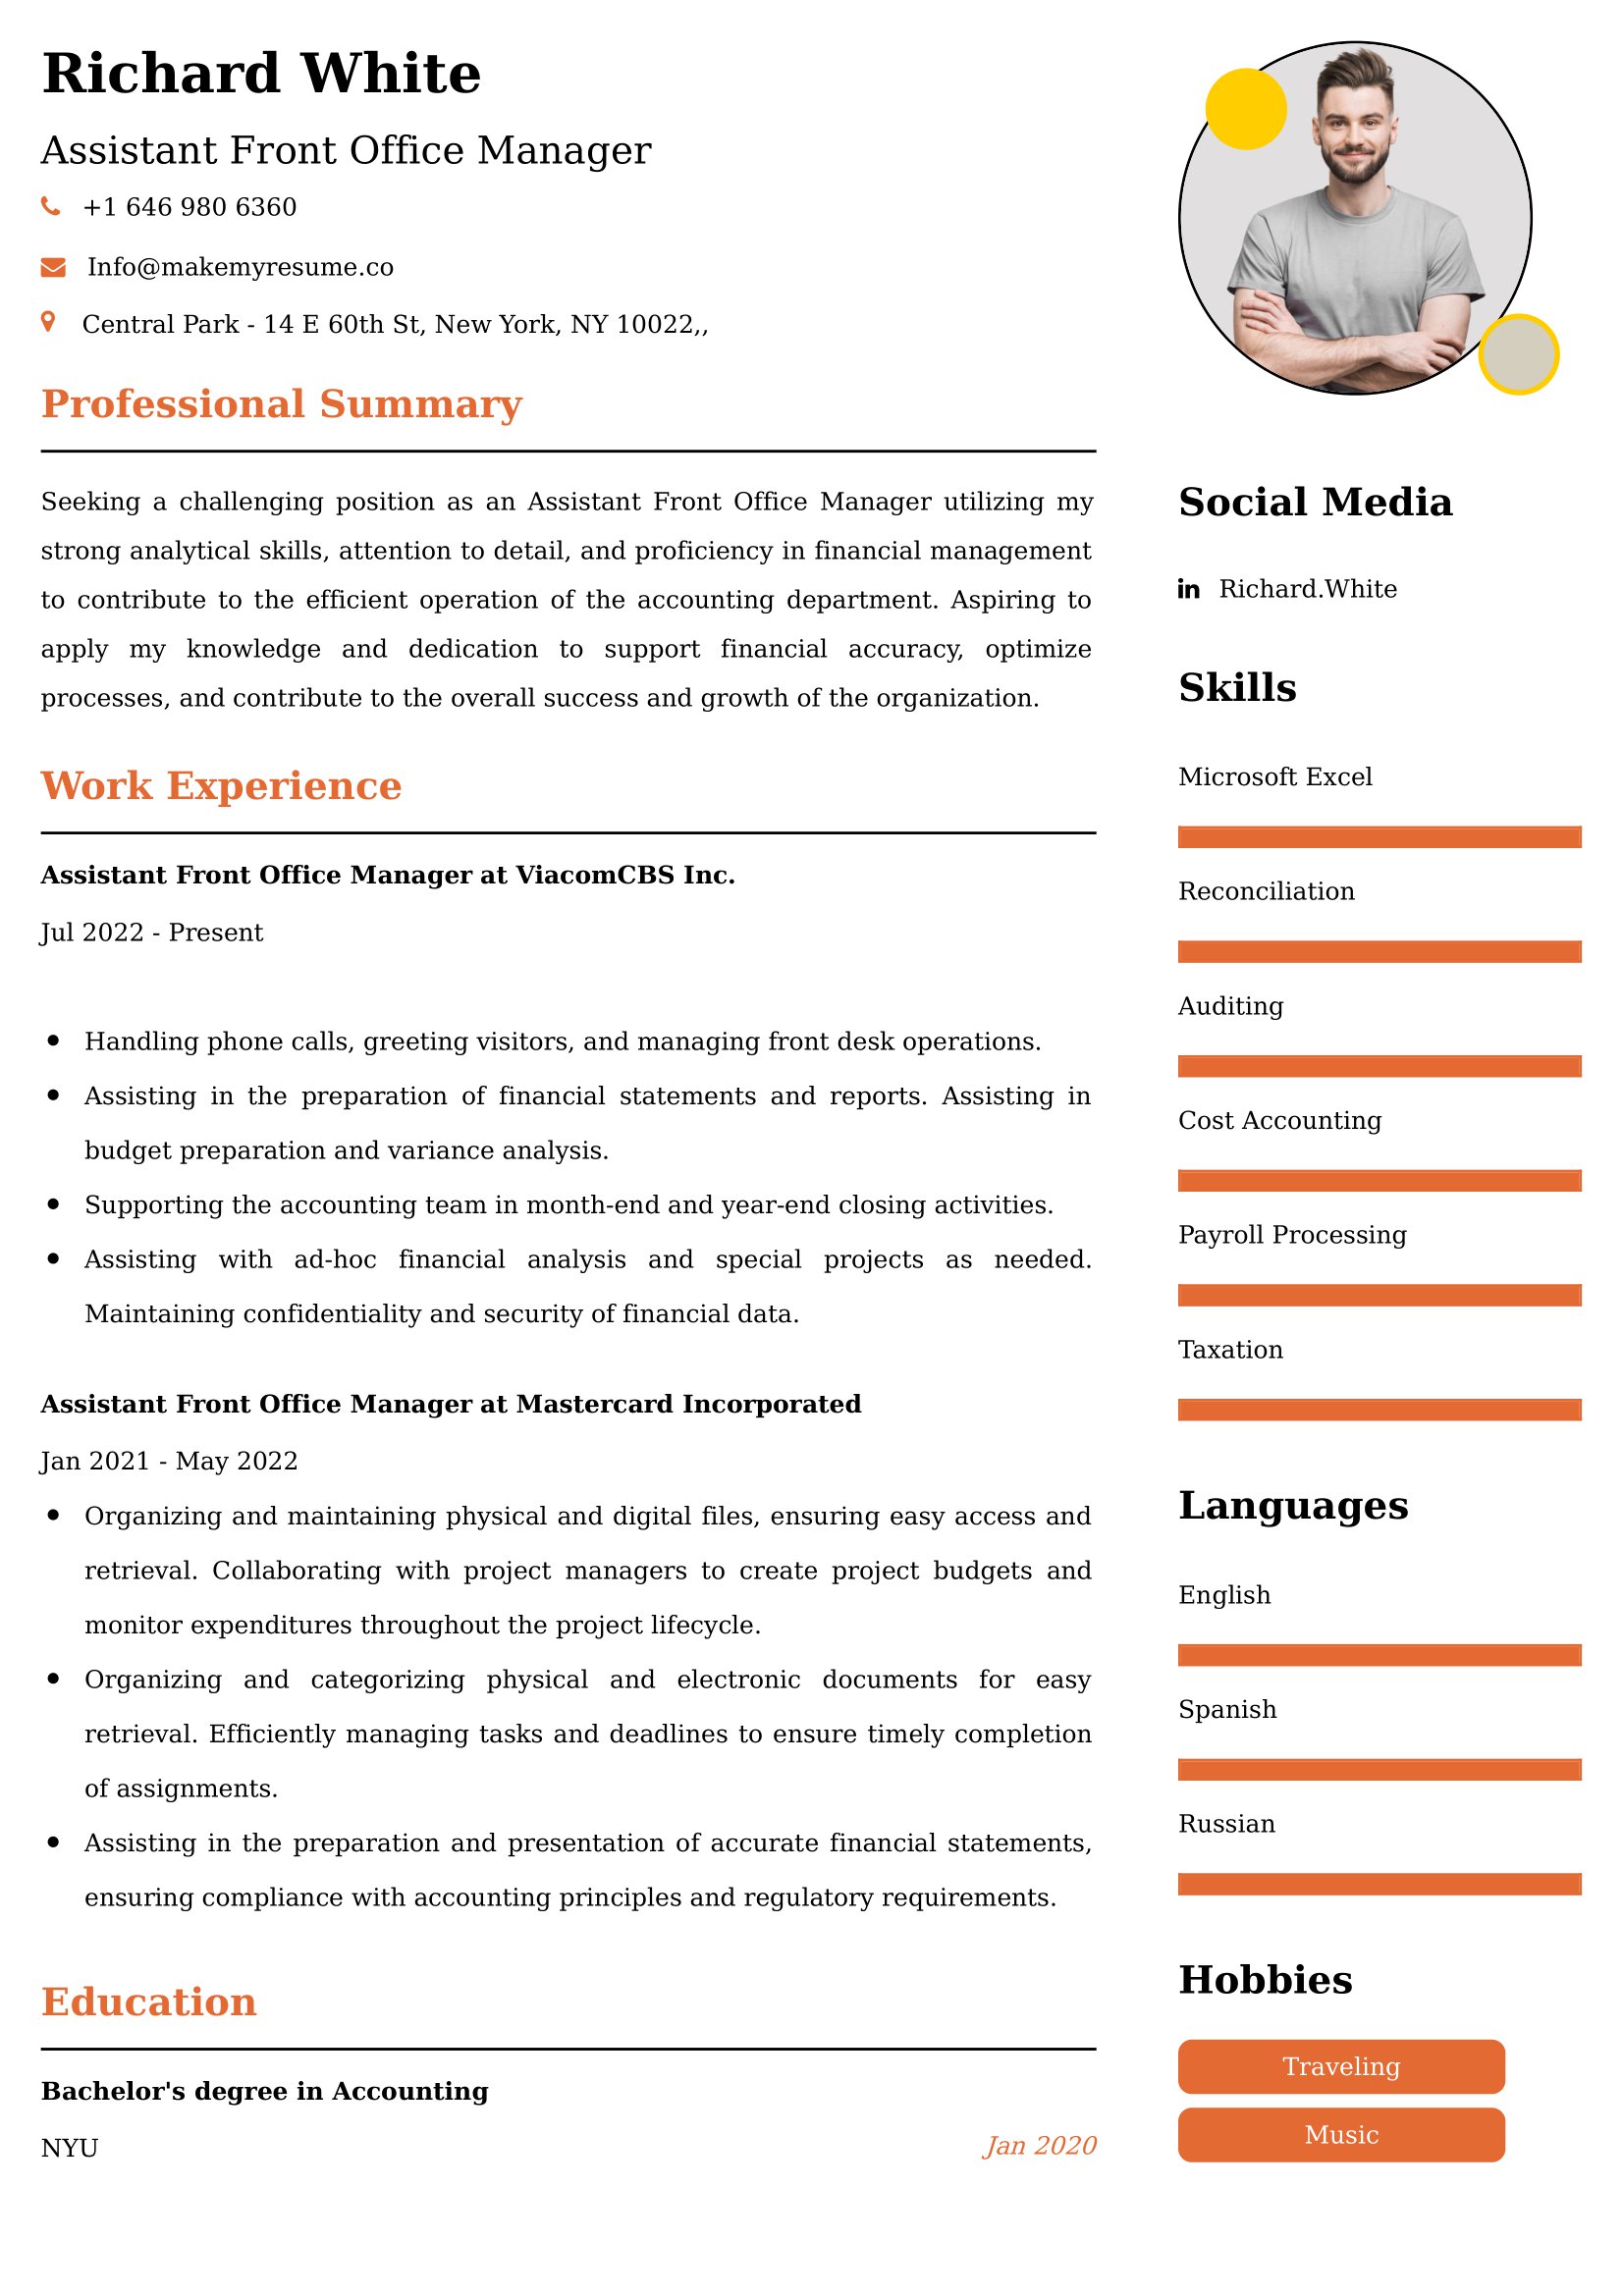 Assistant Front Office Manager Resume Examples - Australian Format and Tips